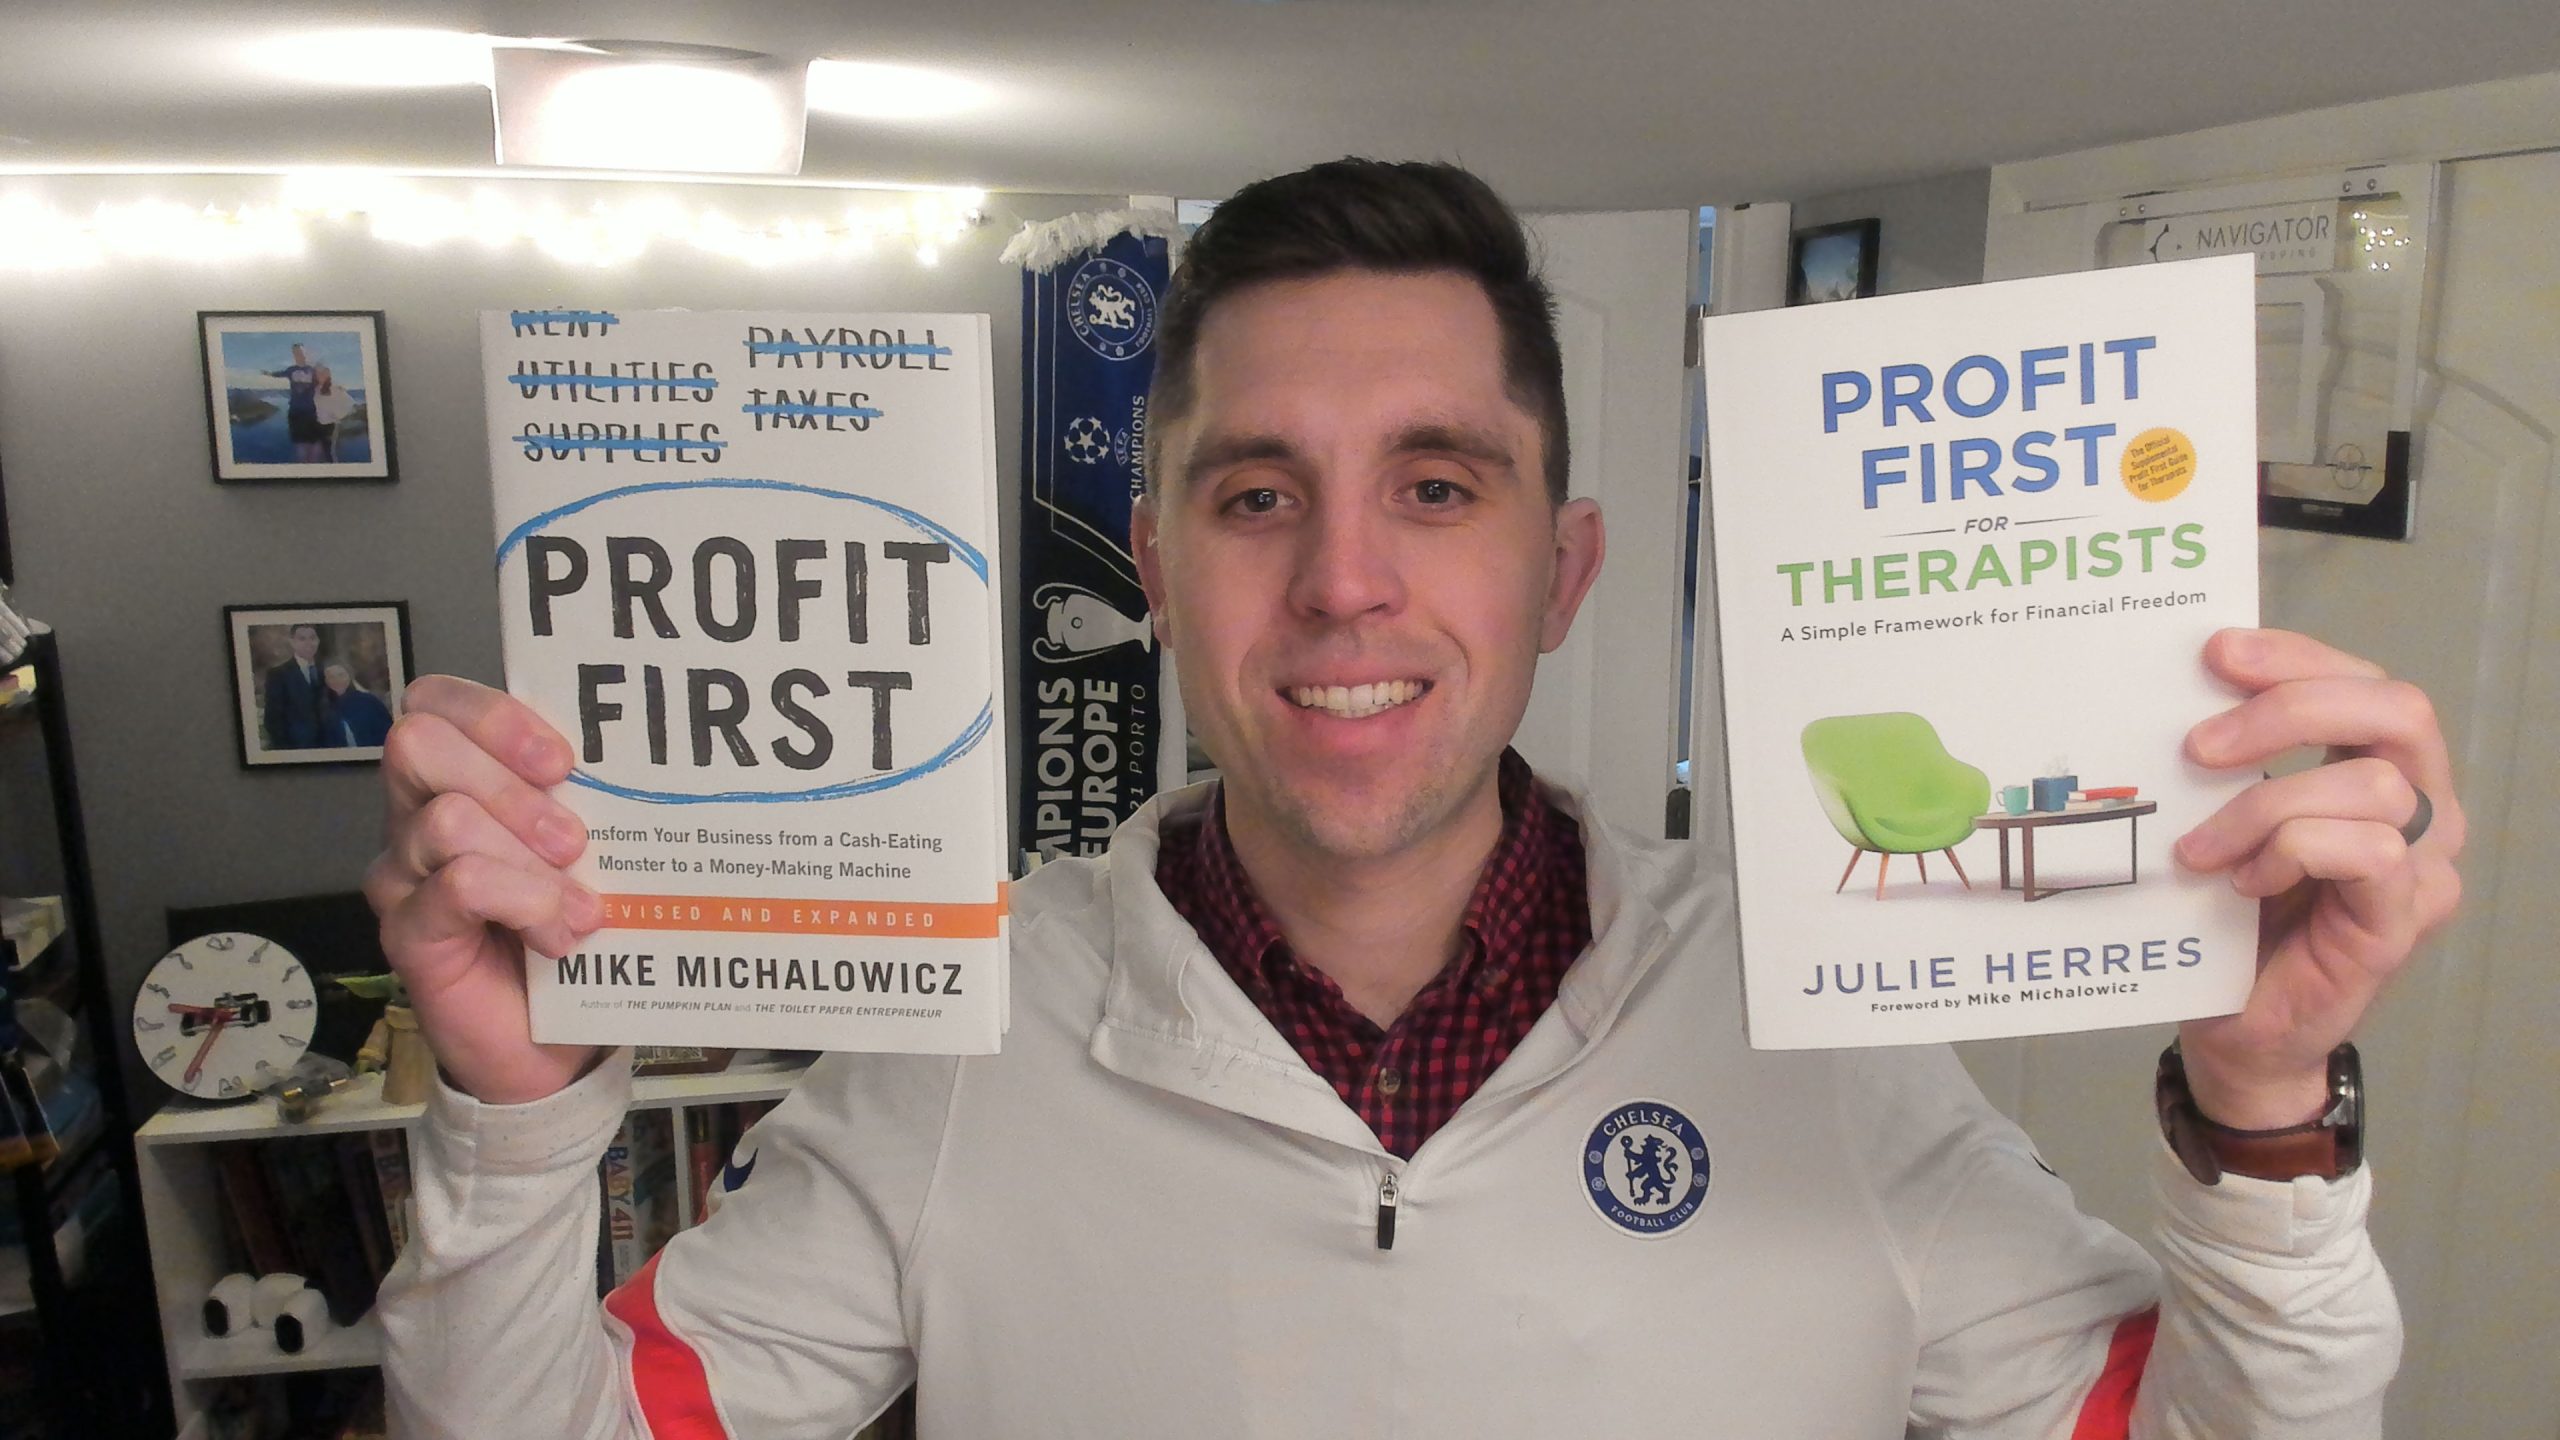 3 Quick Steps to Start Profit First in Your Private Practice